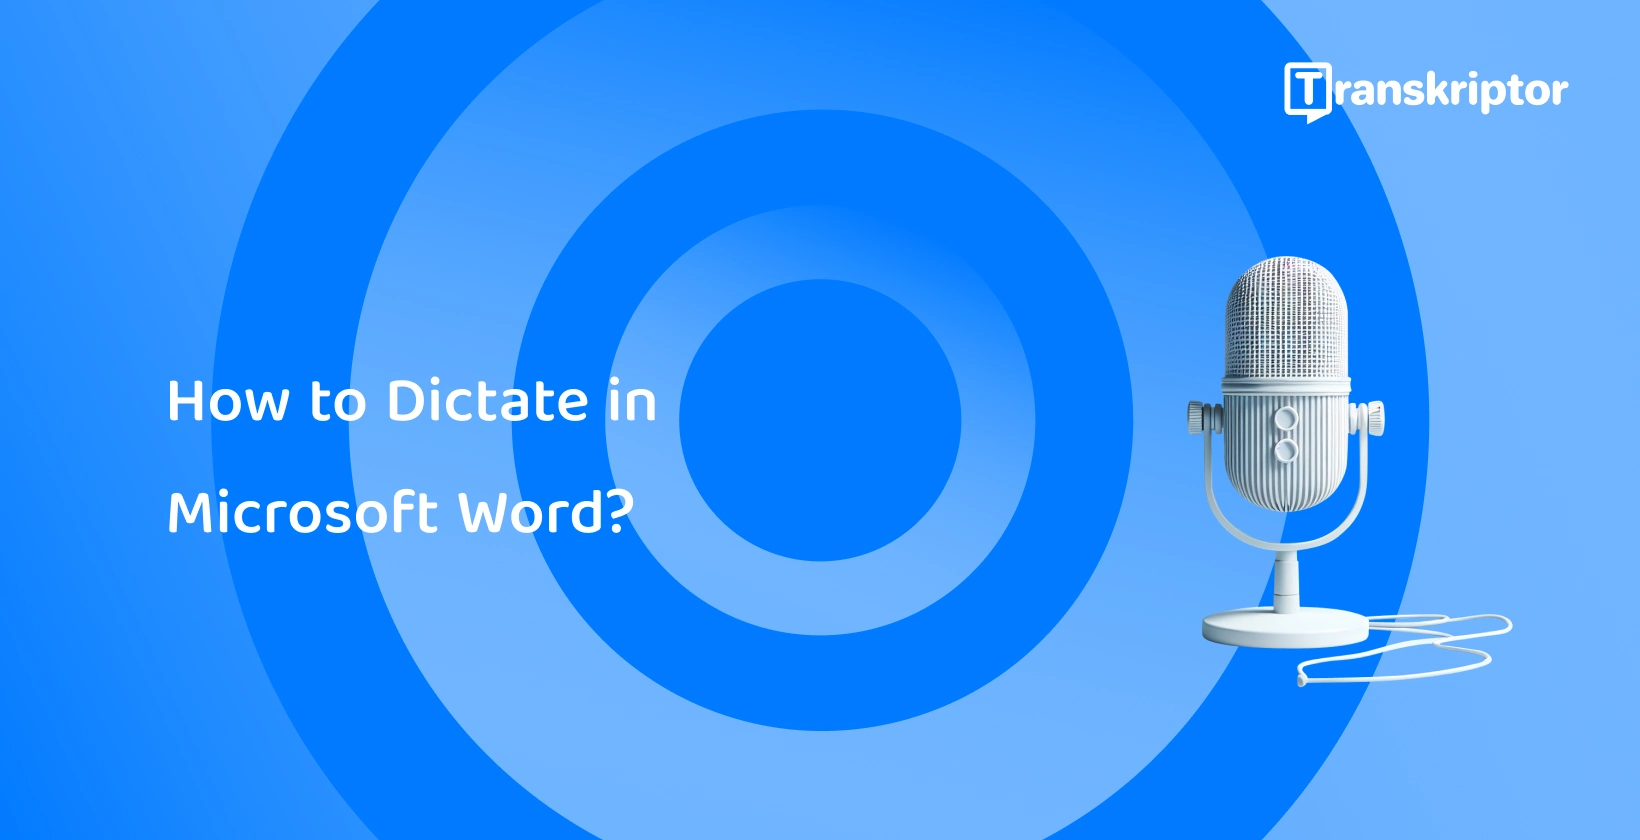 A modern microphone set against a blue background, symbolizing voice dictation features in Microsoft Word.